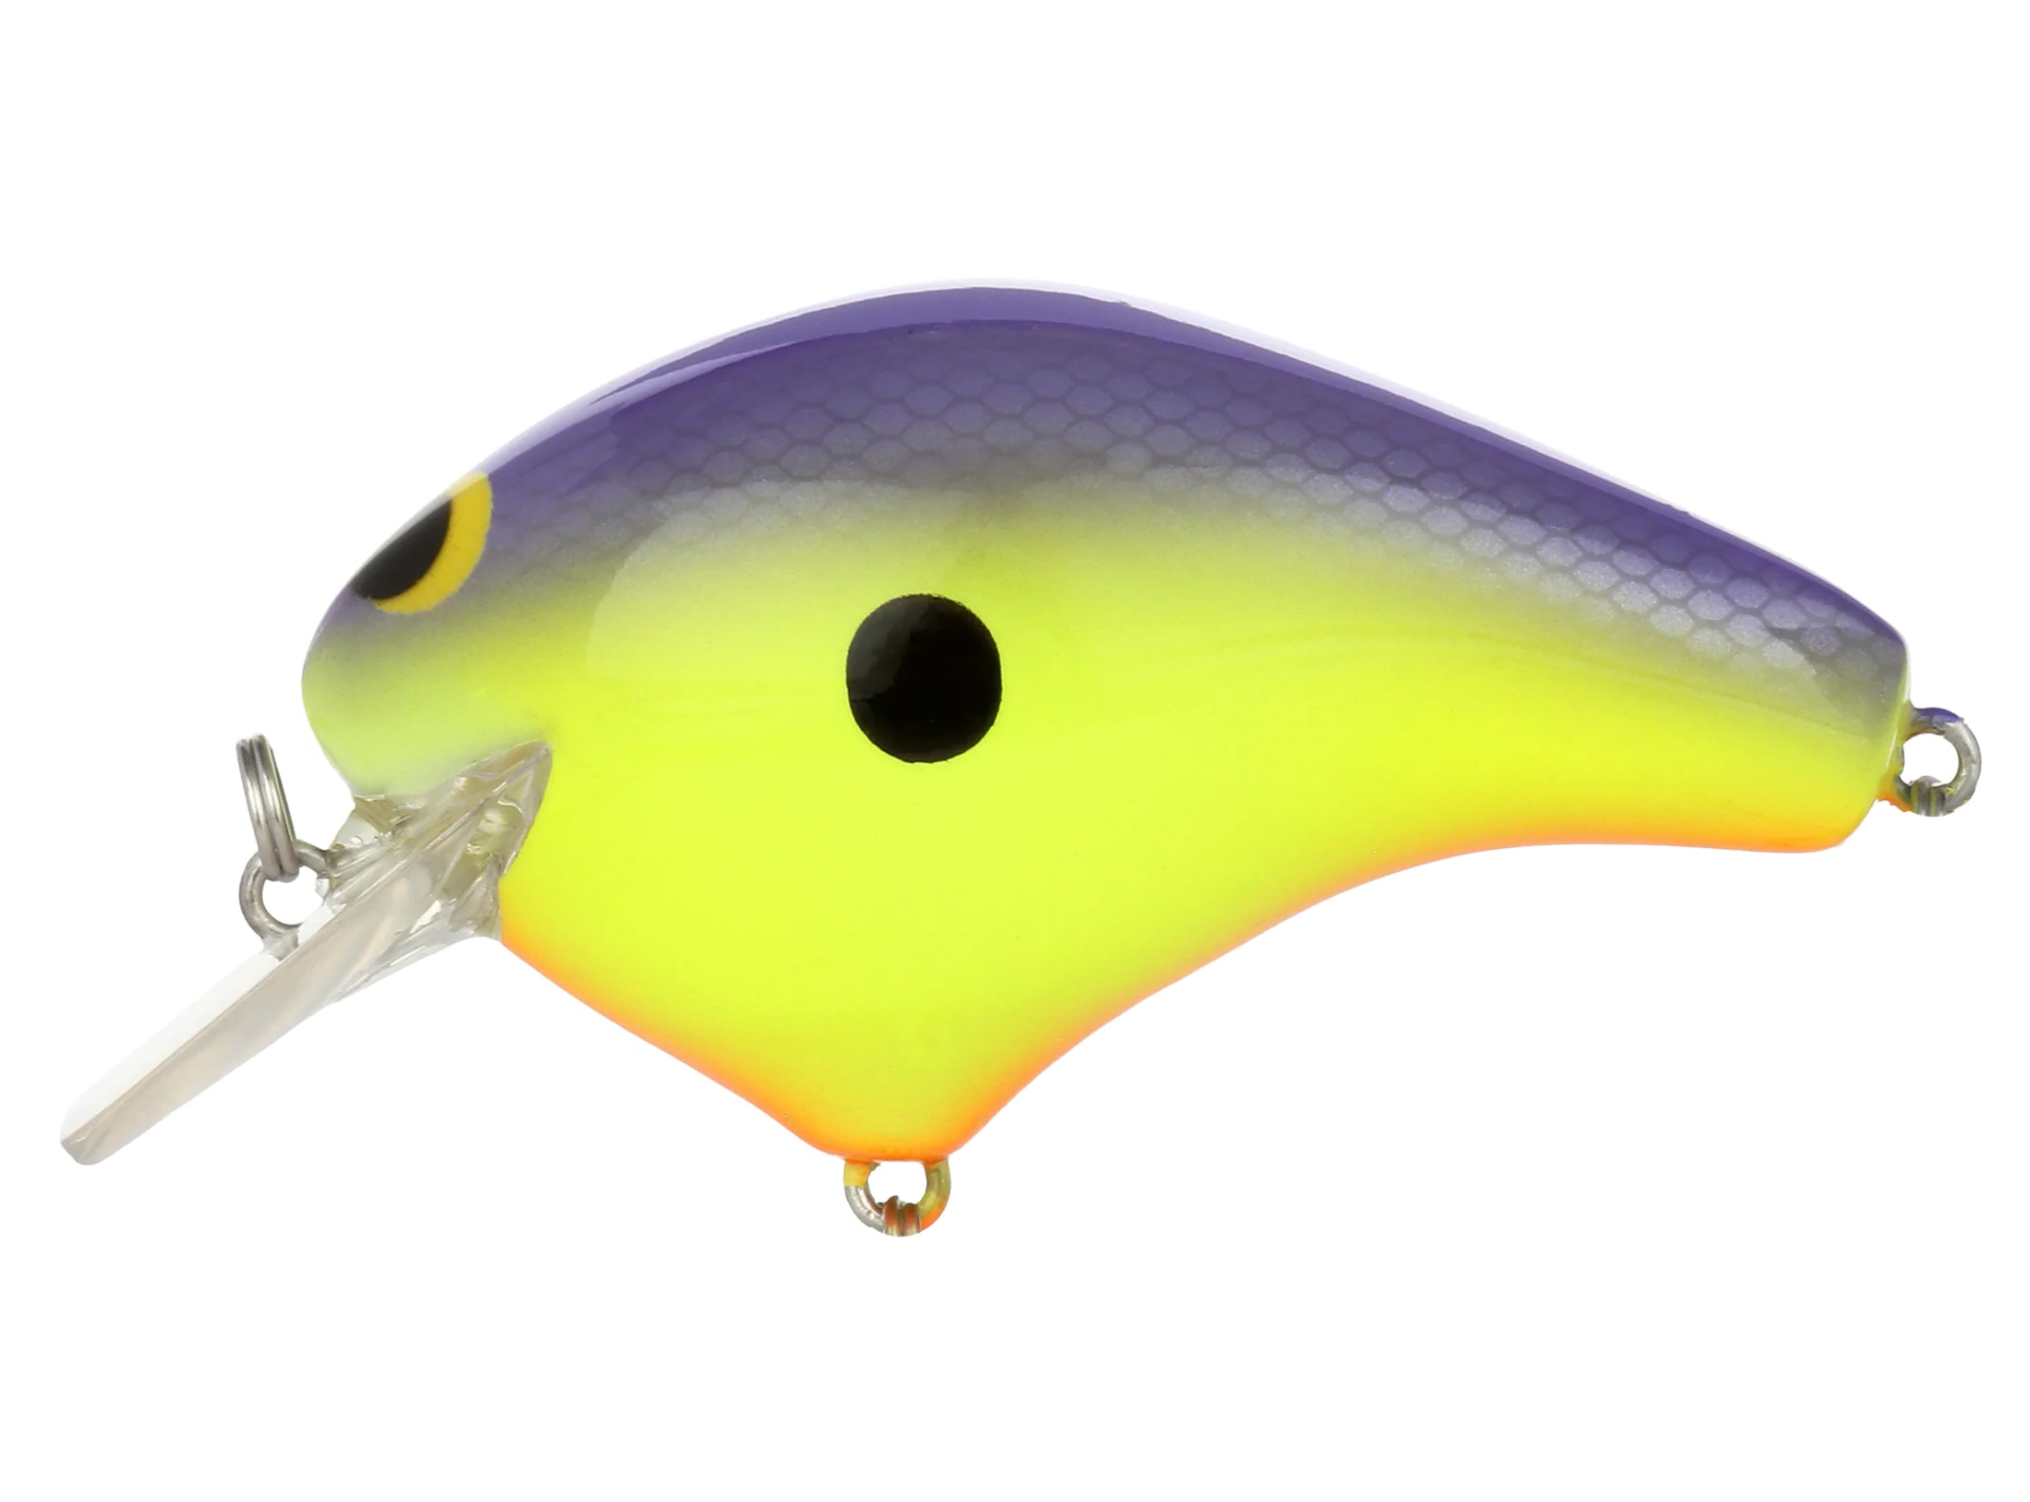 shimano lure, shimano lure Suppliers and Manufacturers at